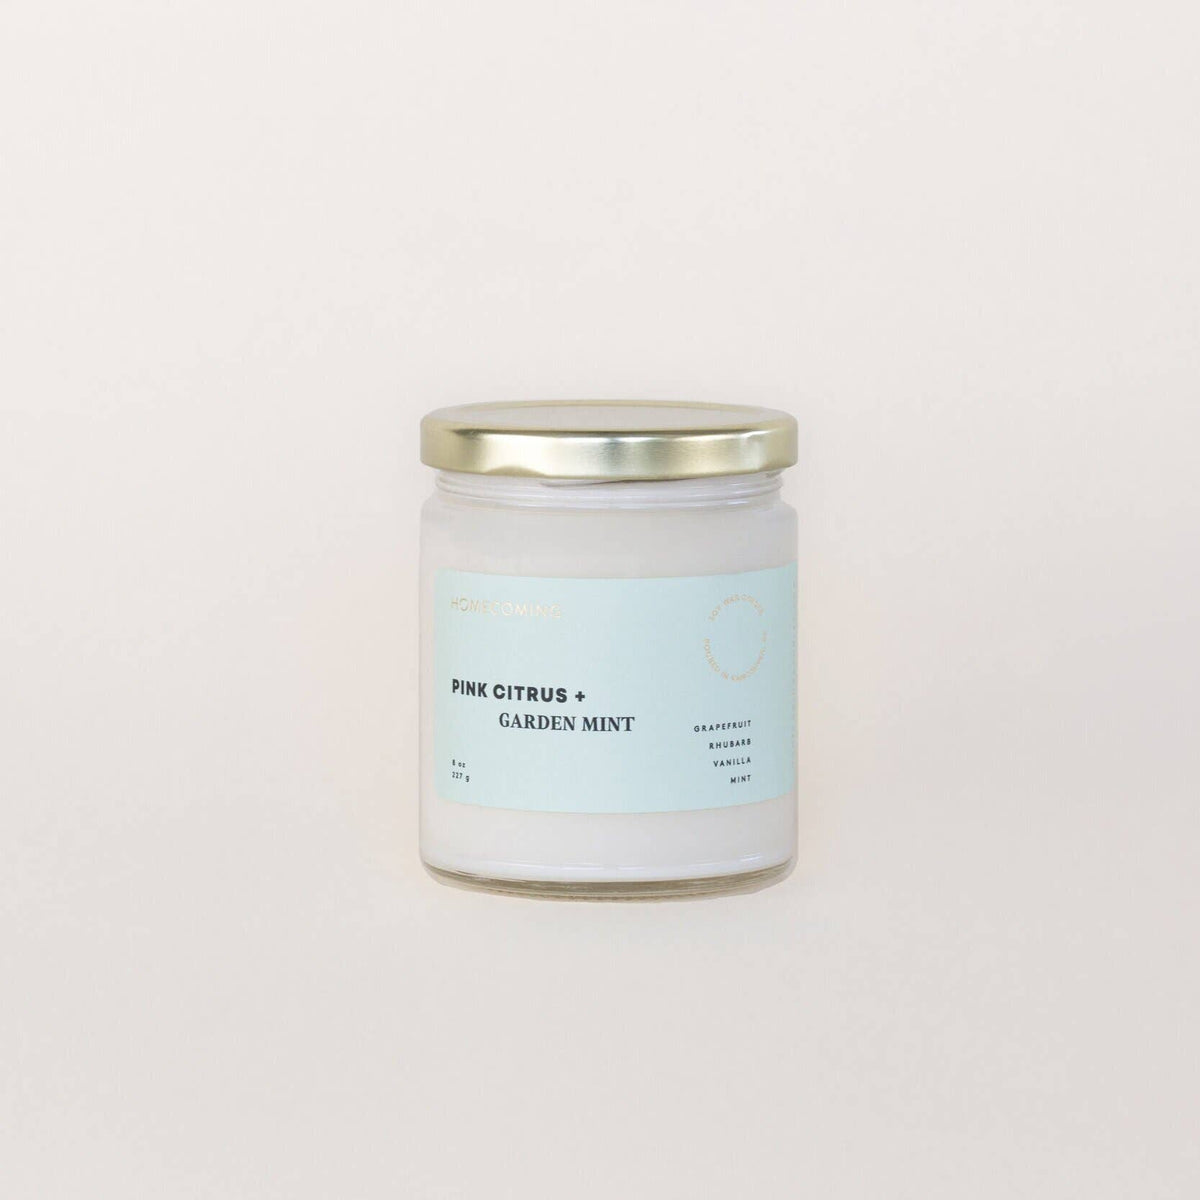 Pink Citrus + Garden Mint Soy Wax Candle